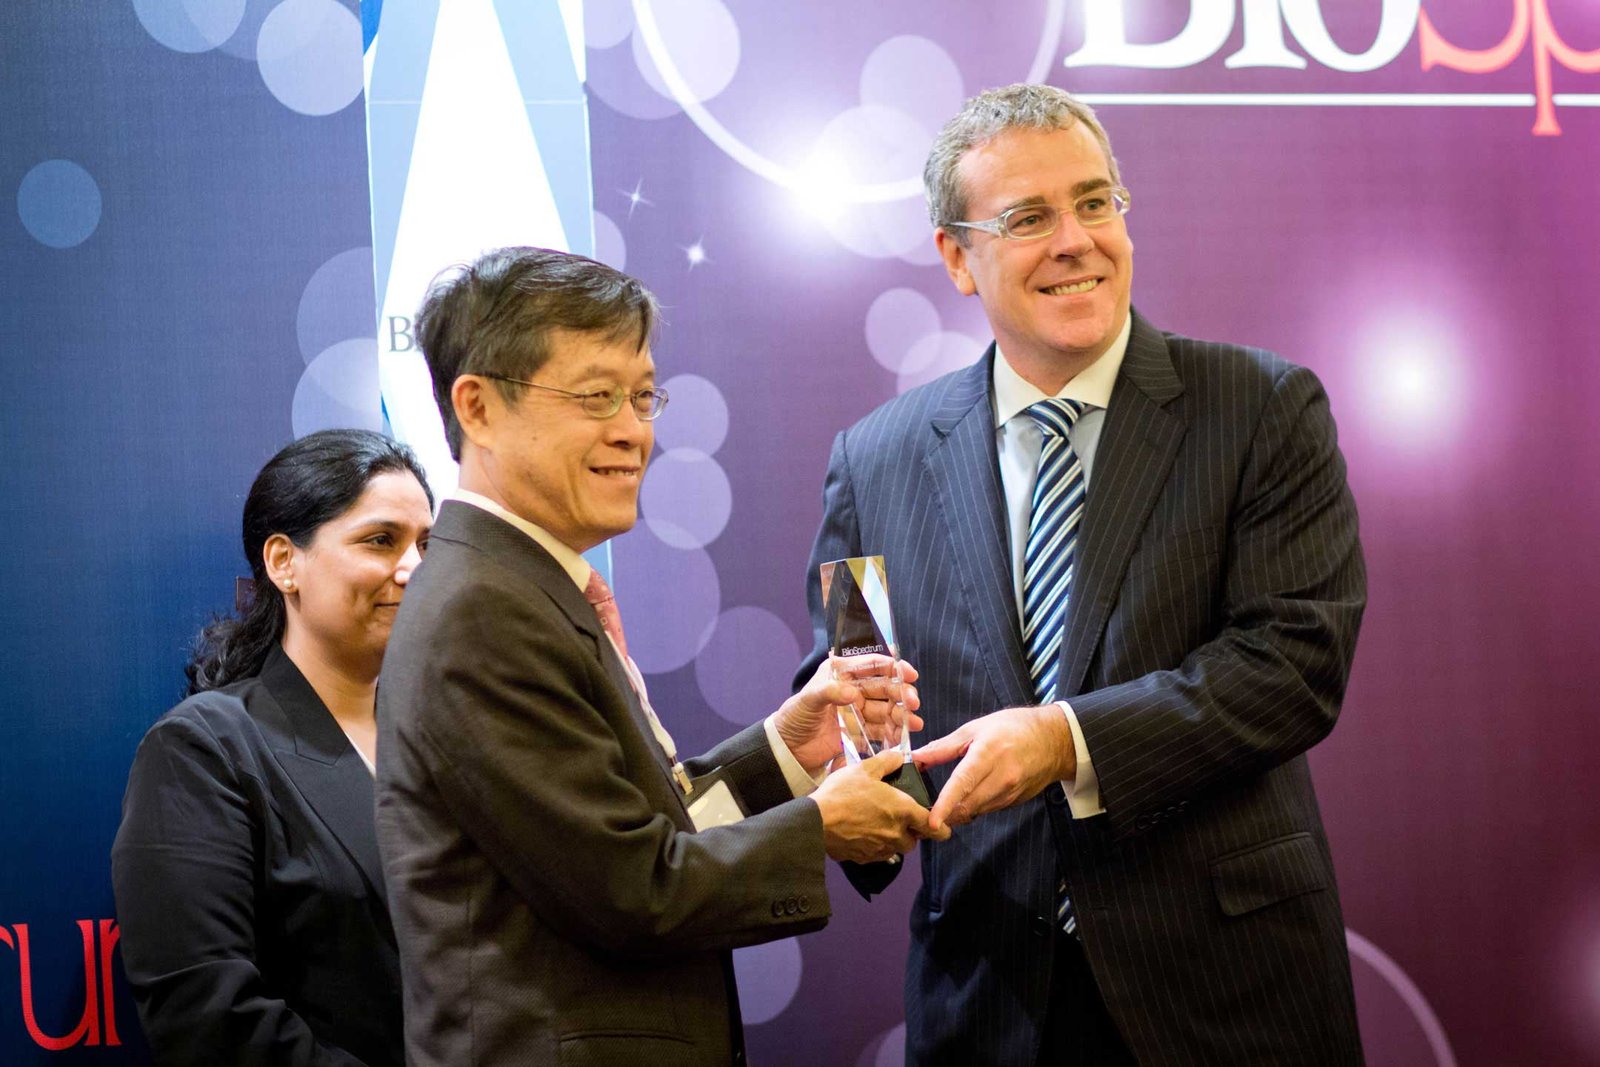 Mr Yap Chew Loong, CEO of Biobot Surgical, Singapore, receives the award from Mr Tim Dillon, commissioner to South East Asia, Victorian Government Business Office, Australia